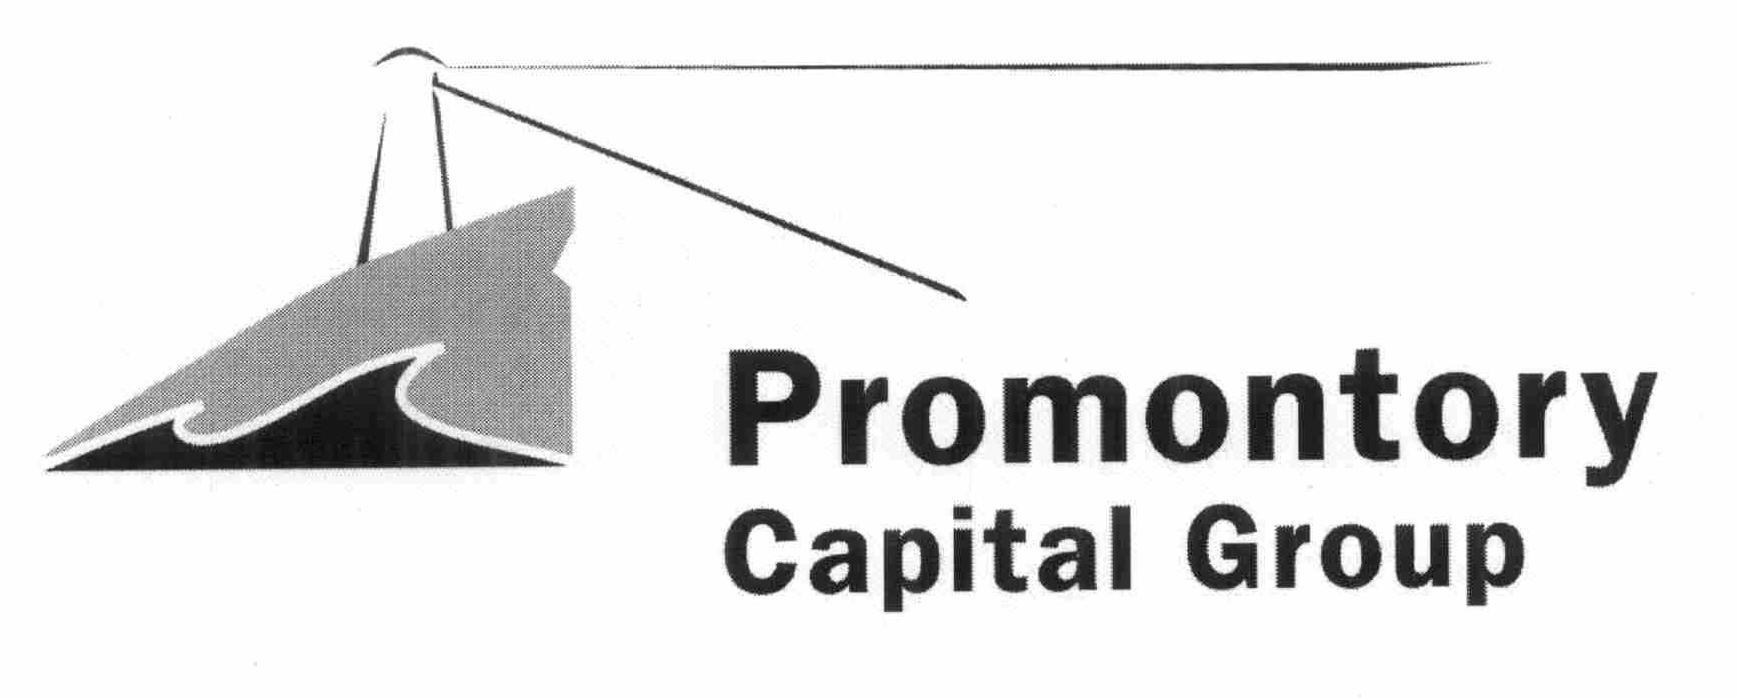  PROMONTORY CAPITAL GROUP